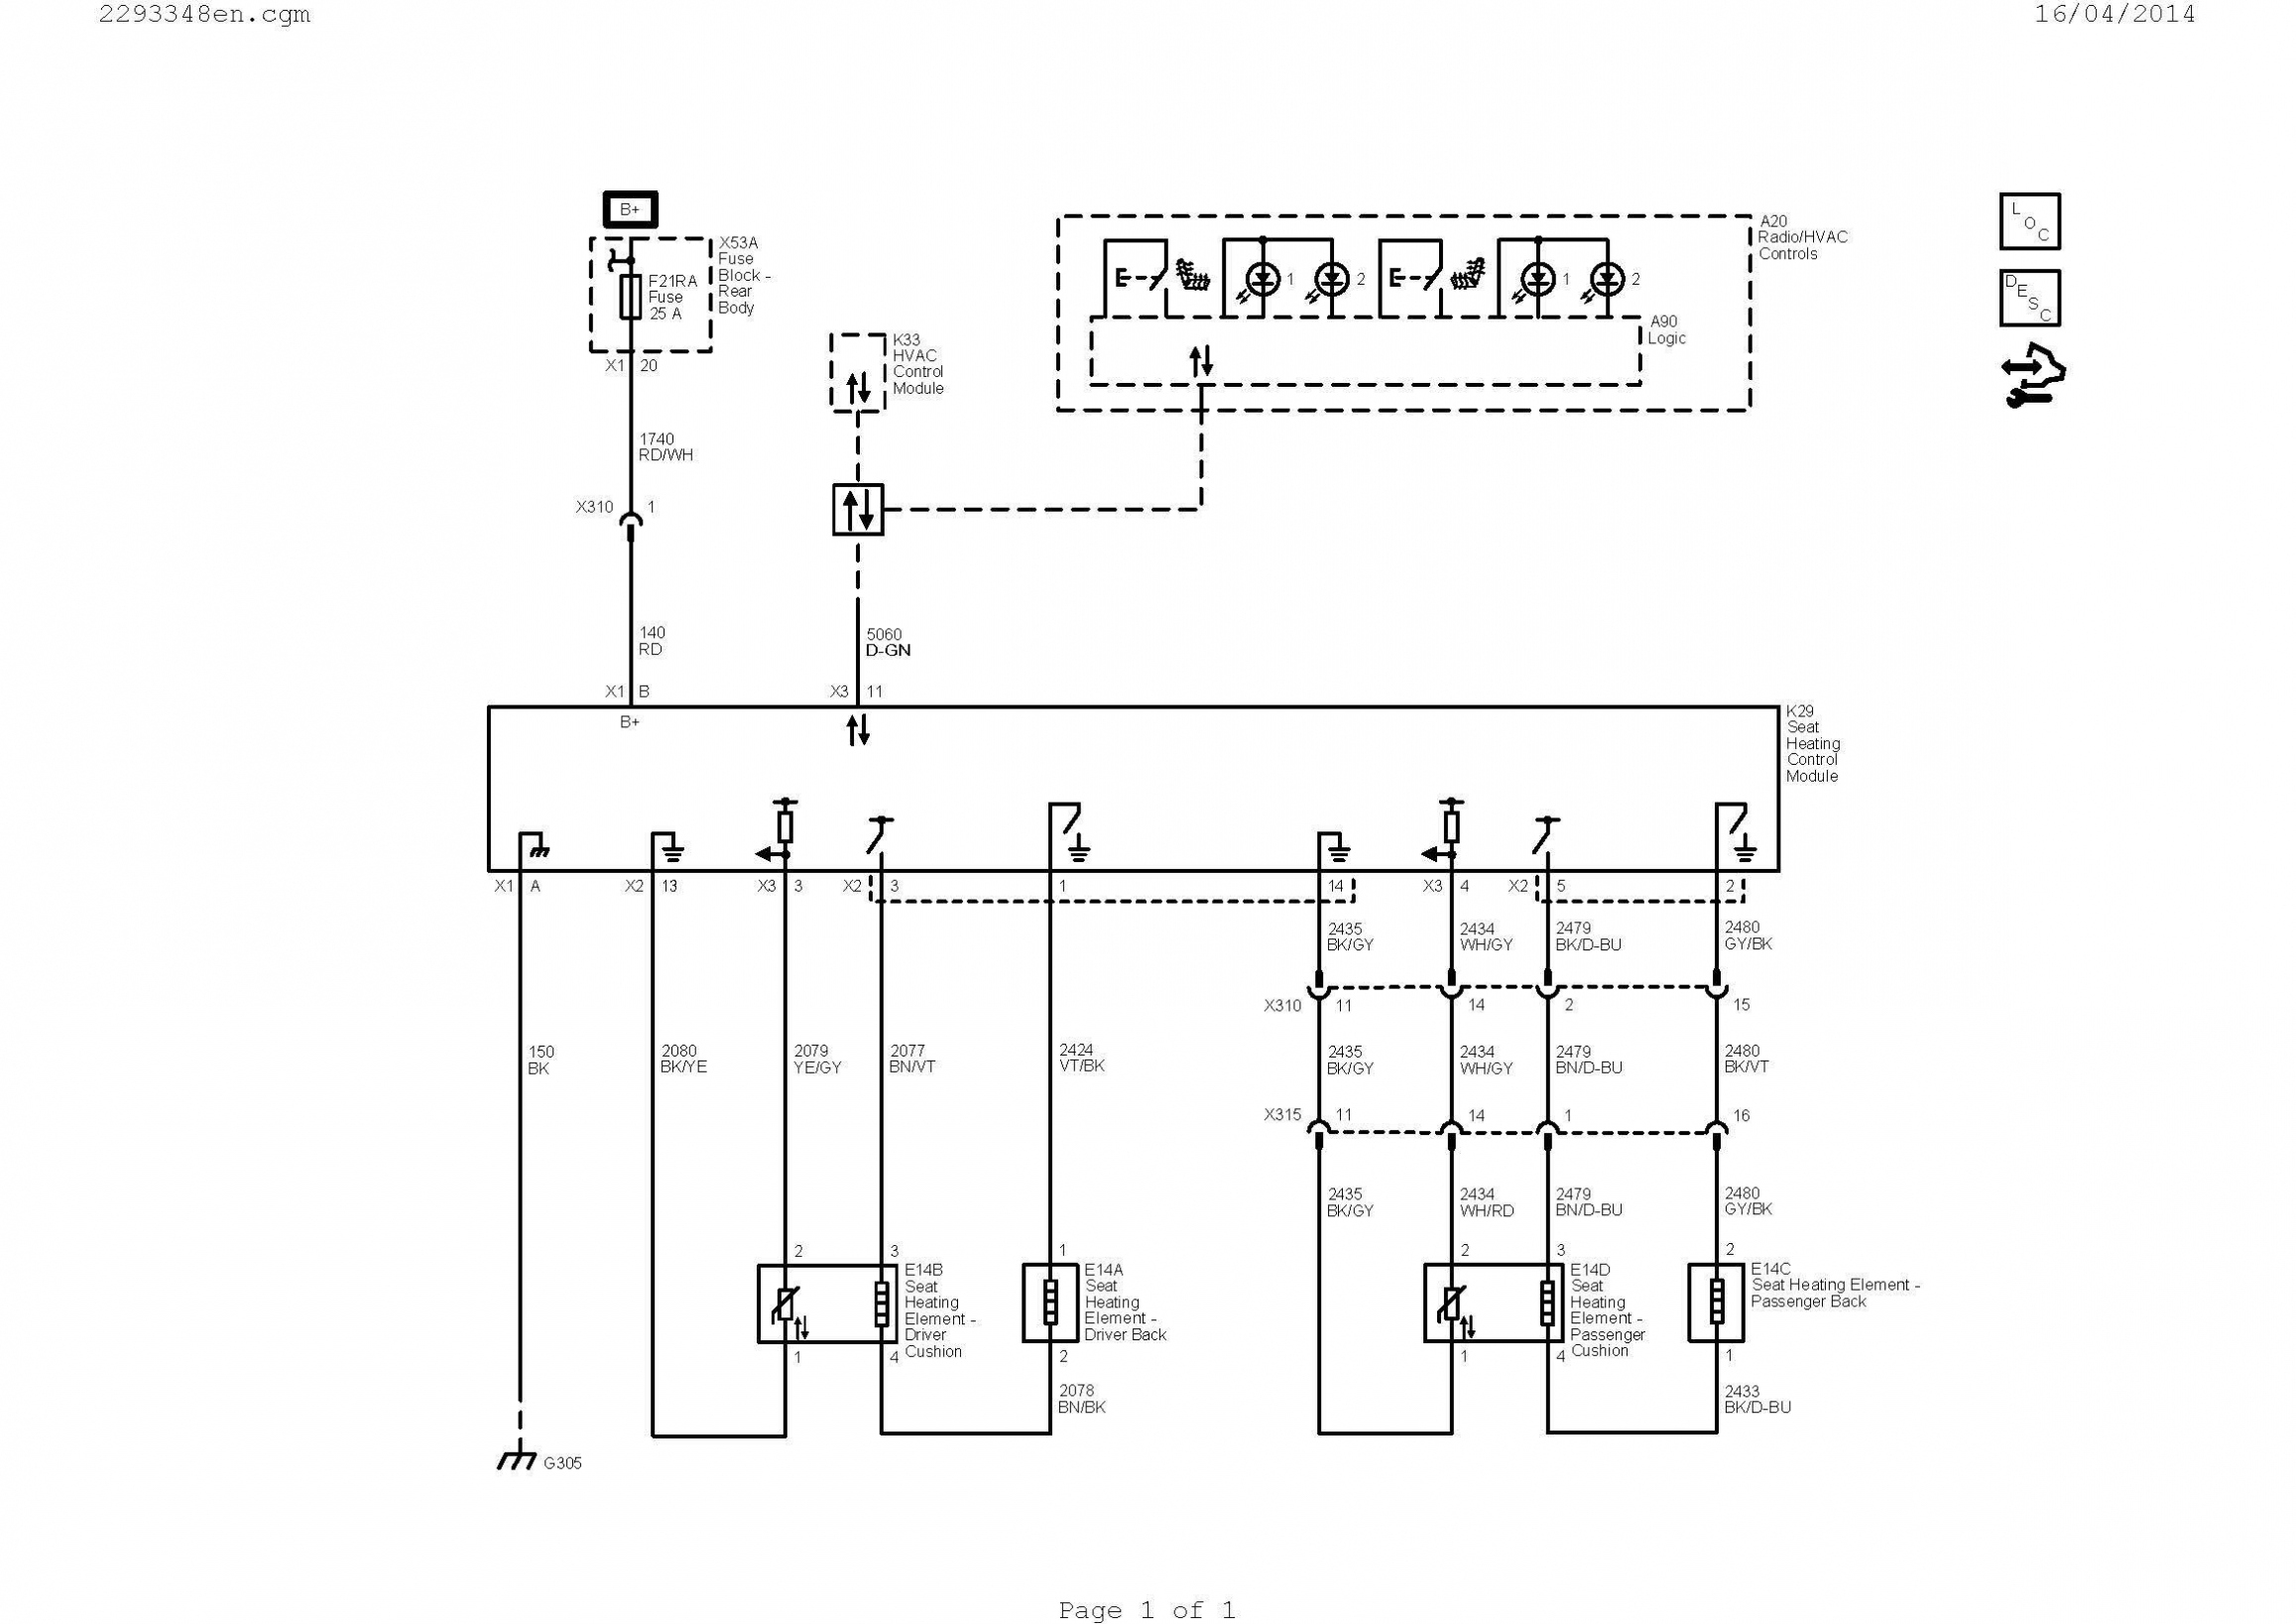 Wiring Diagram For 3 Way Toggle Switch Refrence 3 Position Ignition - 3 Position Toggle Switch Wiring Diagram